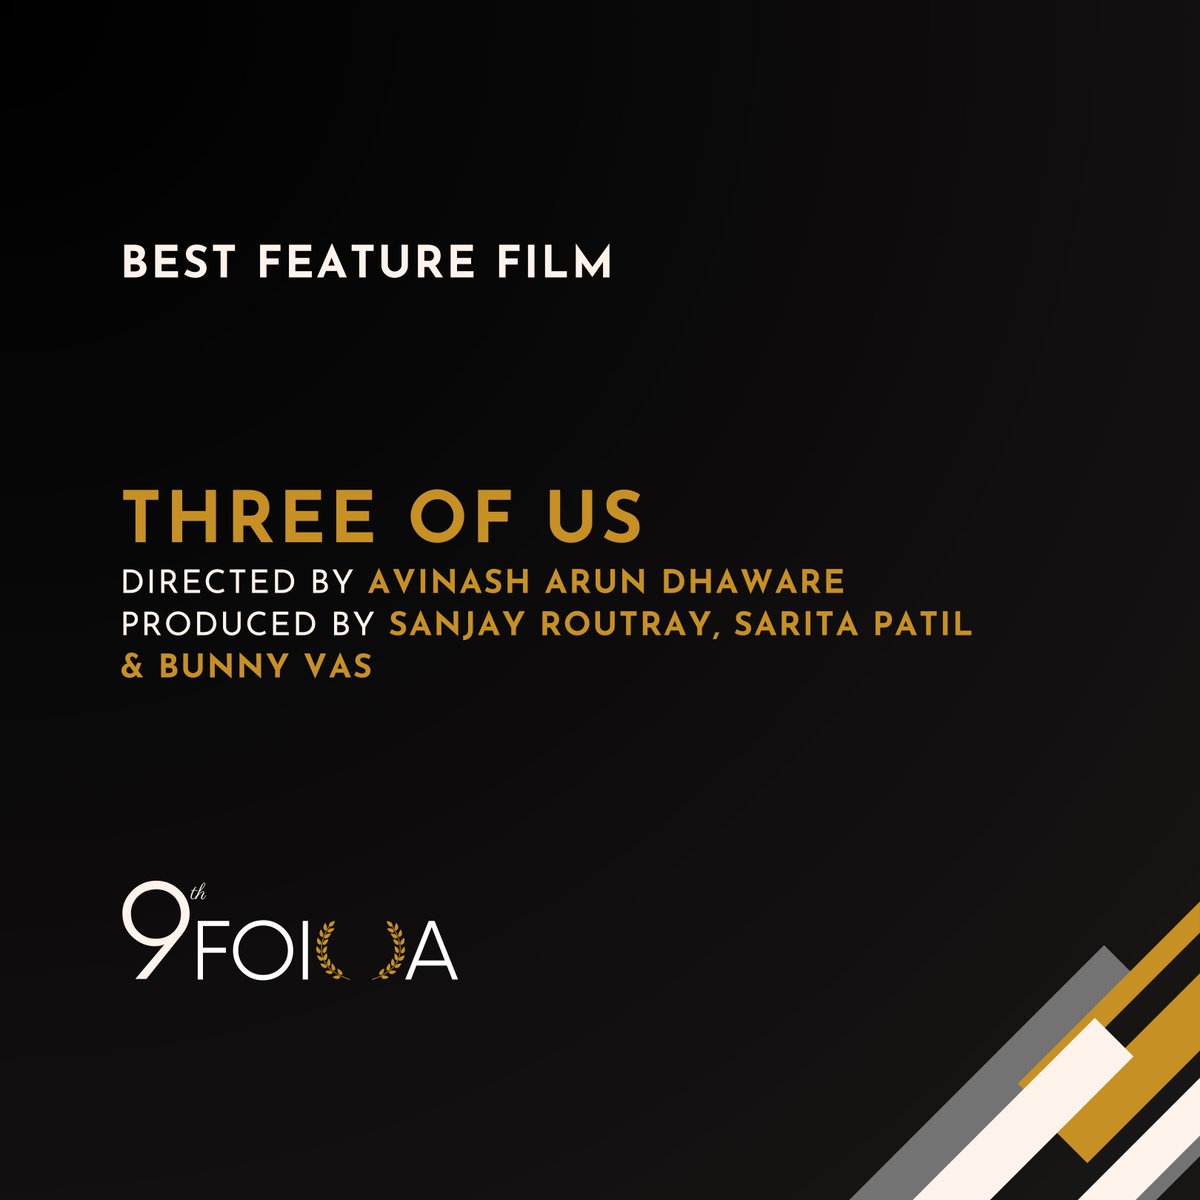 And finally! #9thFOIOA Best Feature Film Three Of Us Directed by Avinash Arun Dhaware Produced by Sanjay Routray, Sarita Patil & Bunny Vas @Saritagpatil @MatchboxShots @AlluEnts